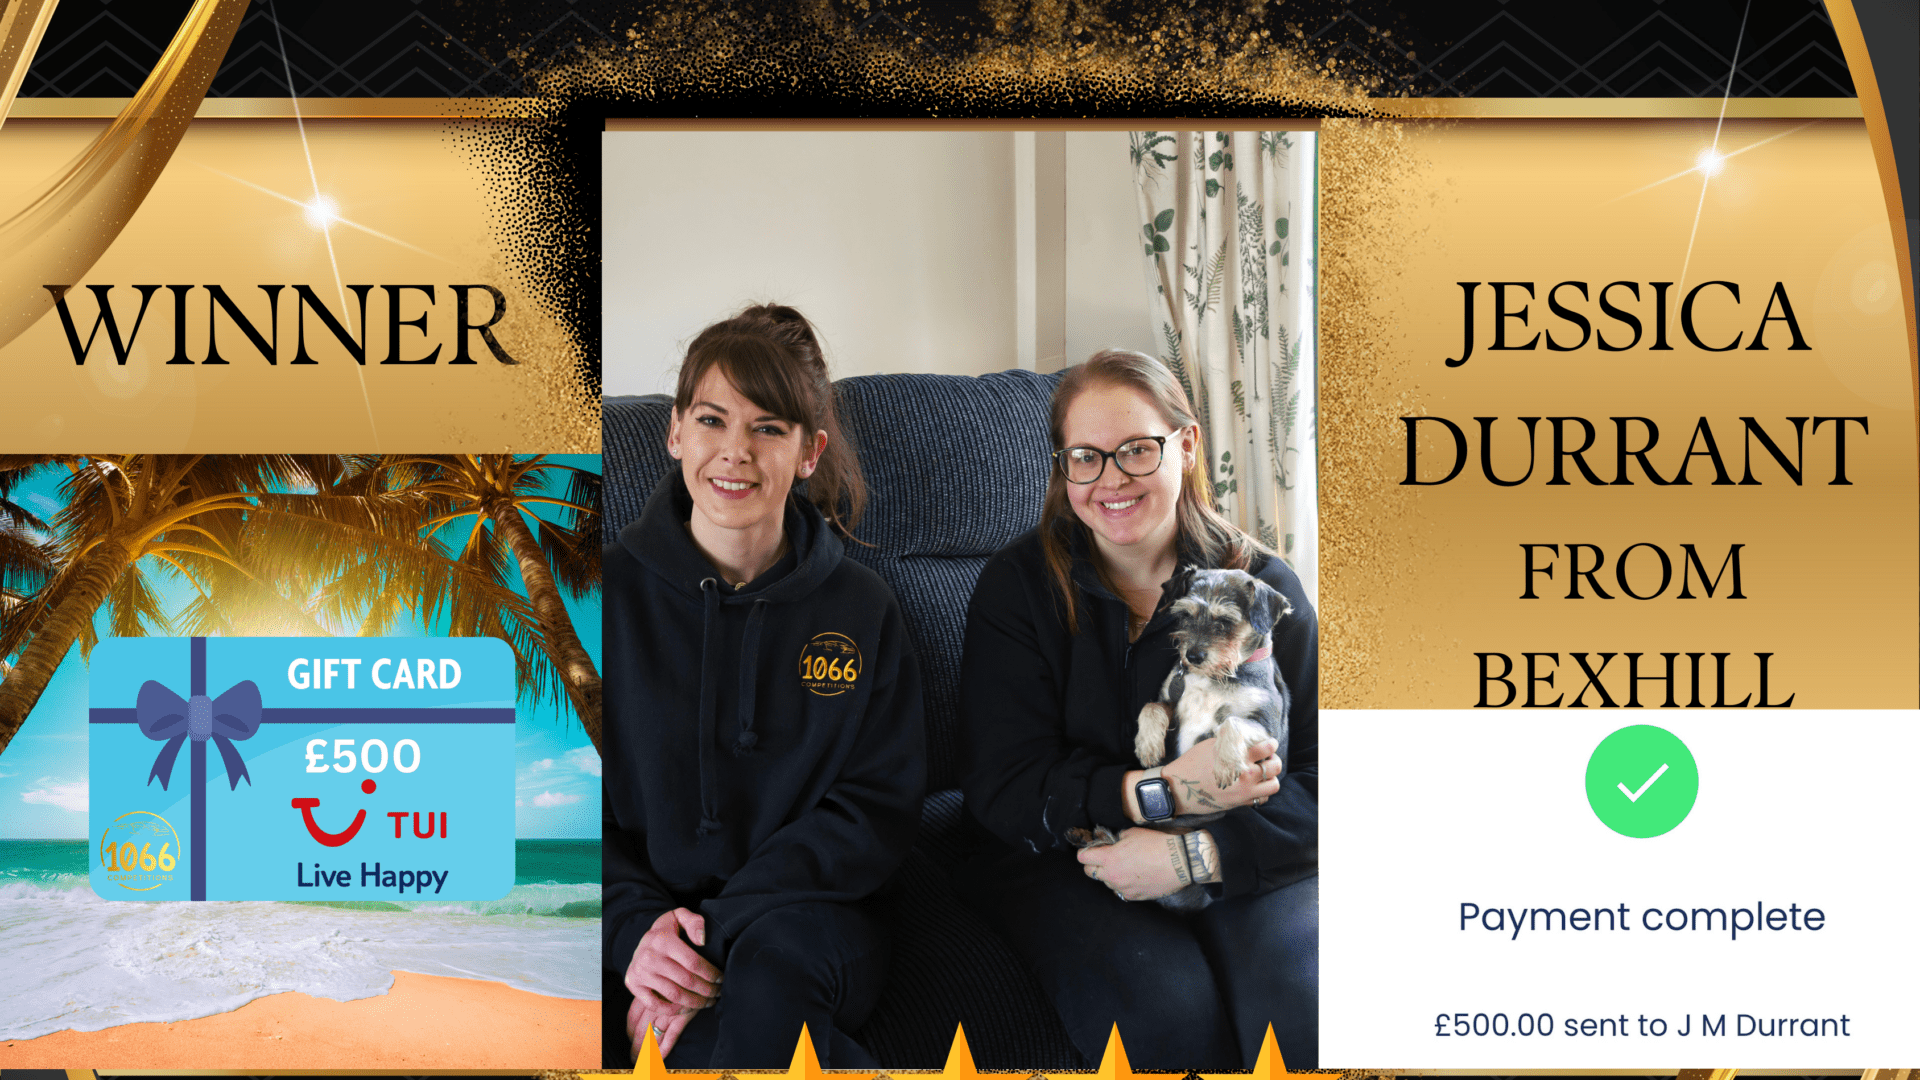 Congratulations to Jessica Durrant from Bexhill, winner of a £500 TUI voucher!